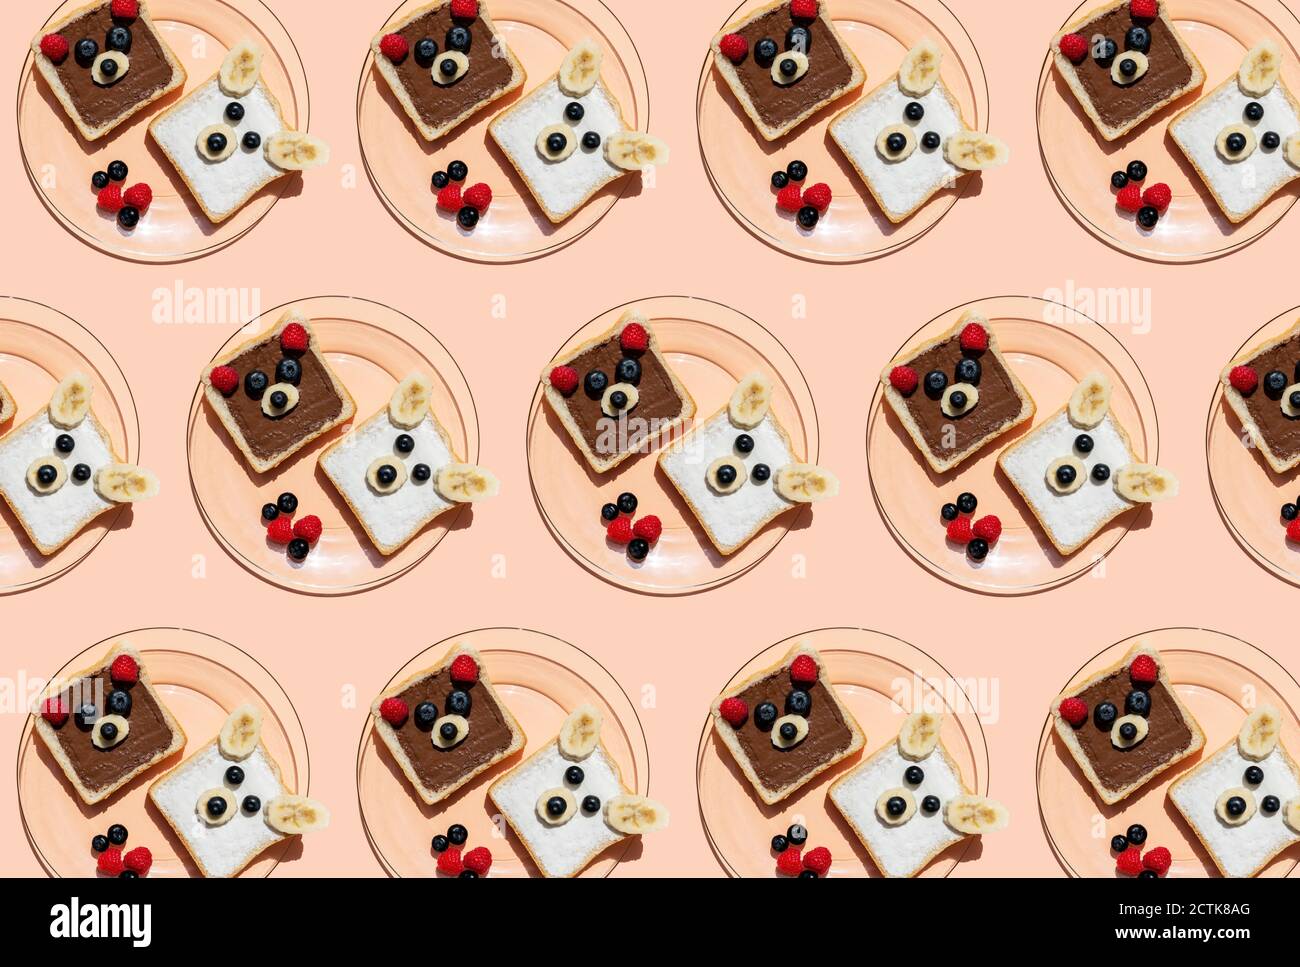 Pattern of plates with toasts decorated with bear faces made of fruits Stock Photo